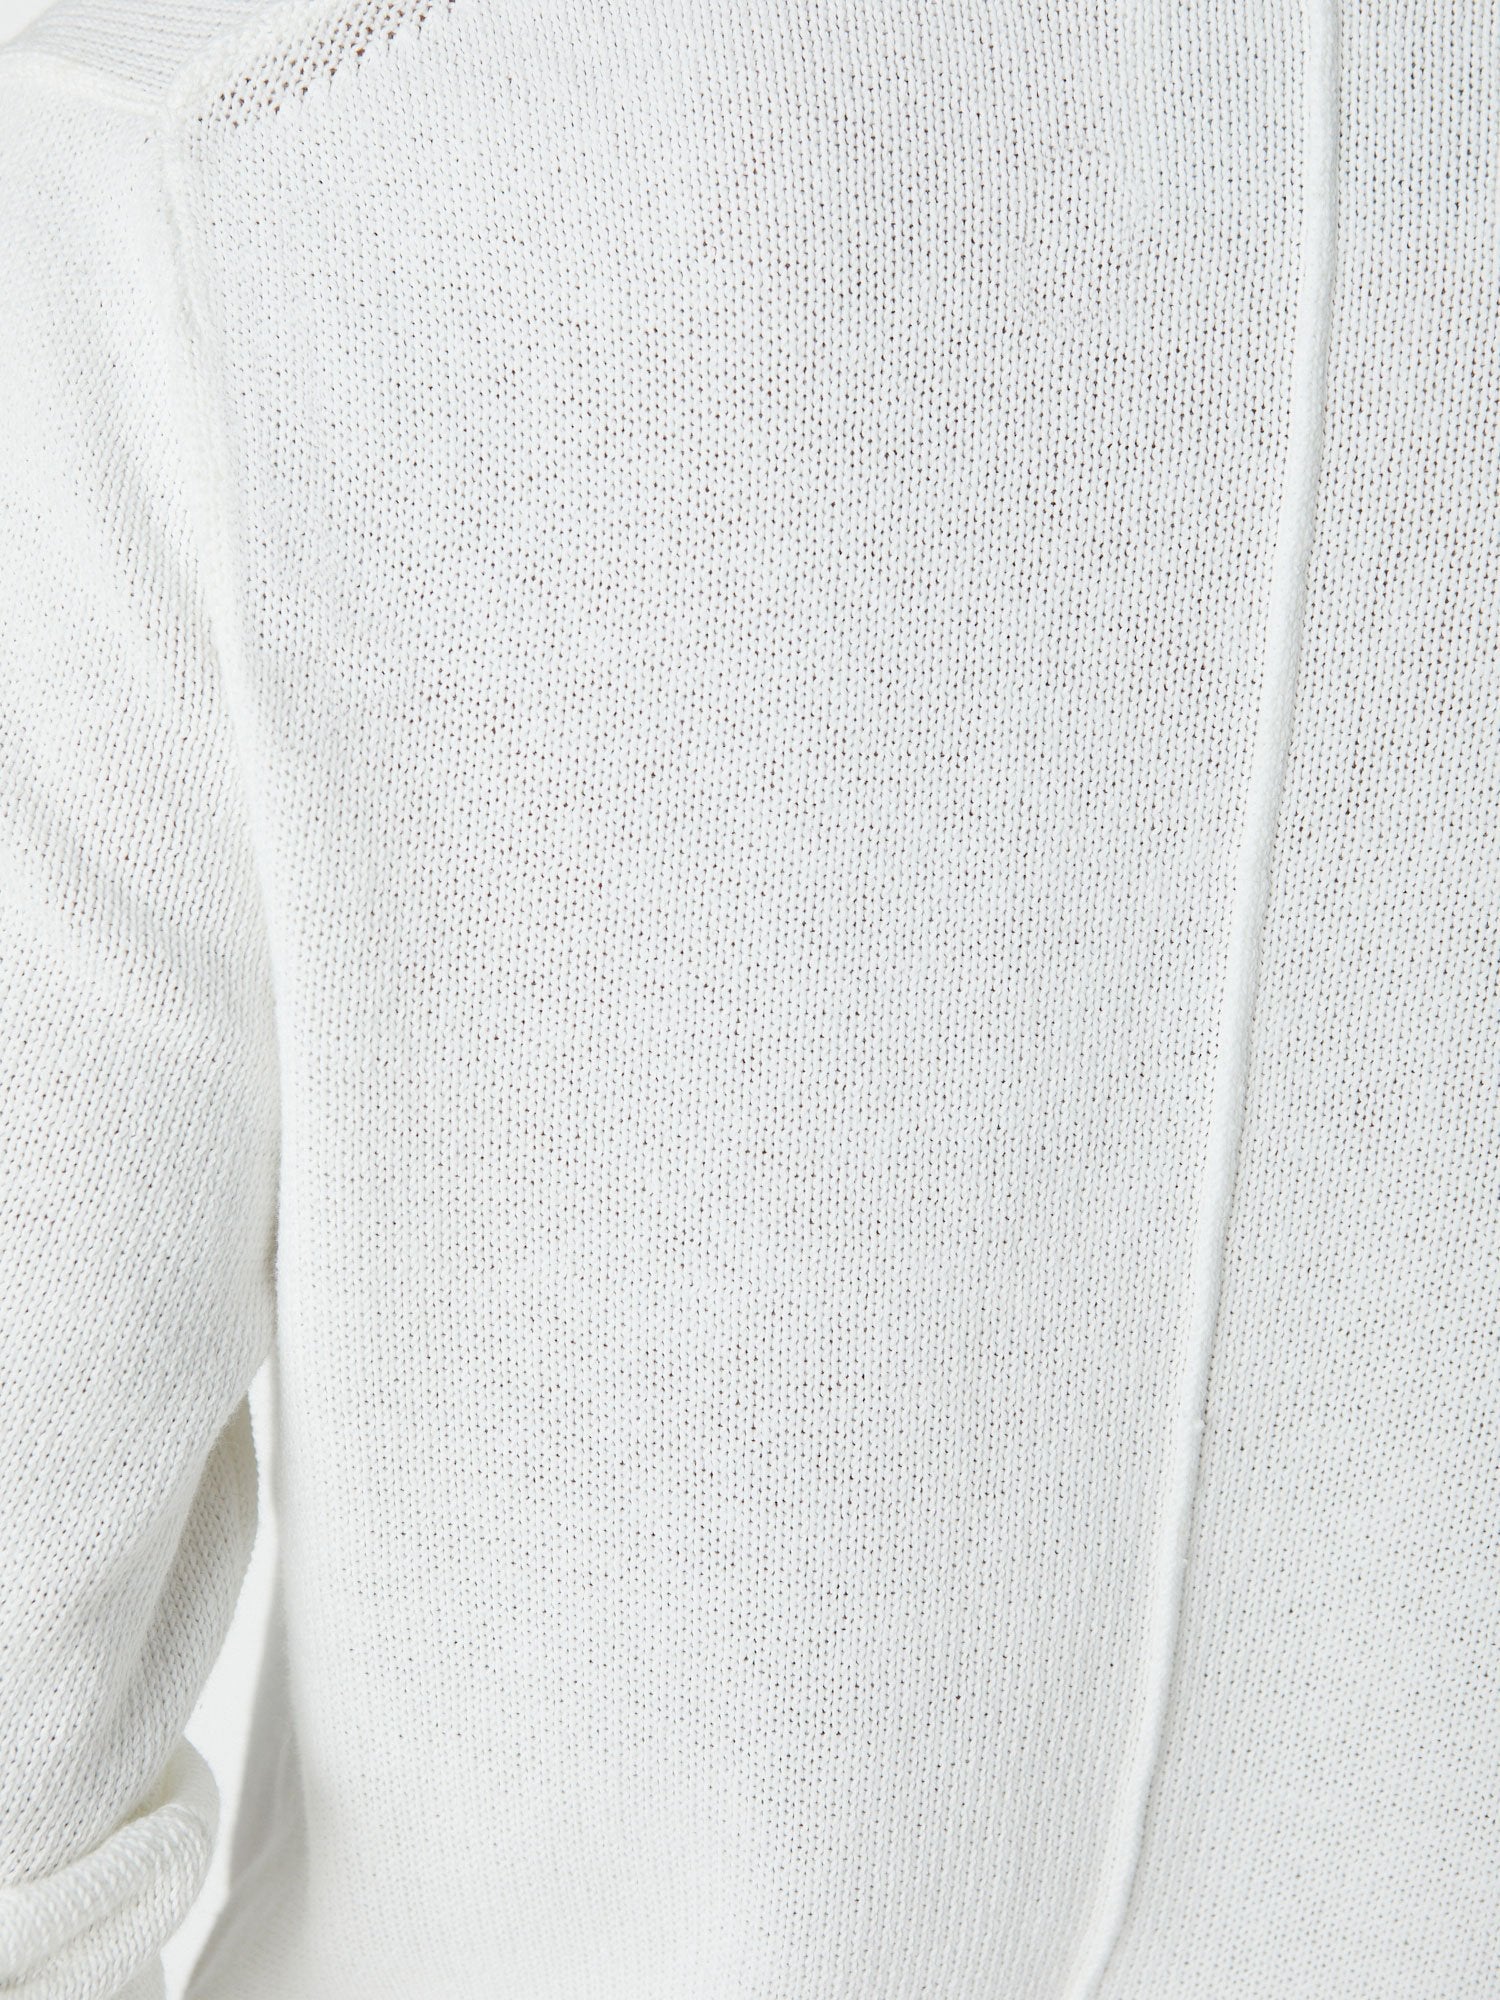 The Roan Layered Henley